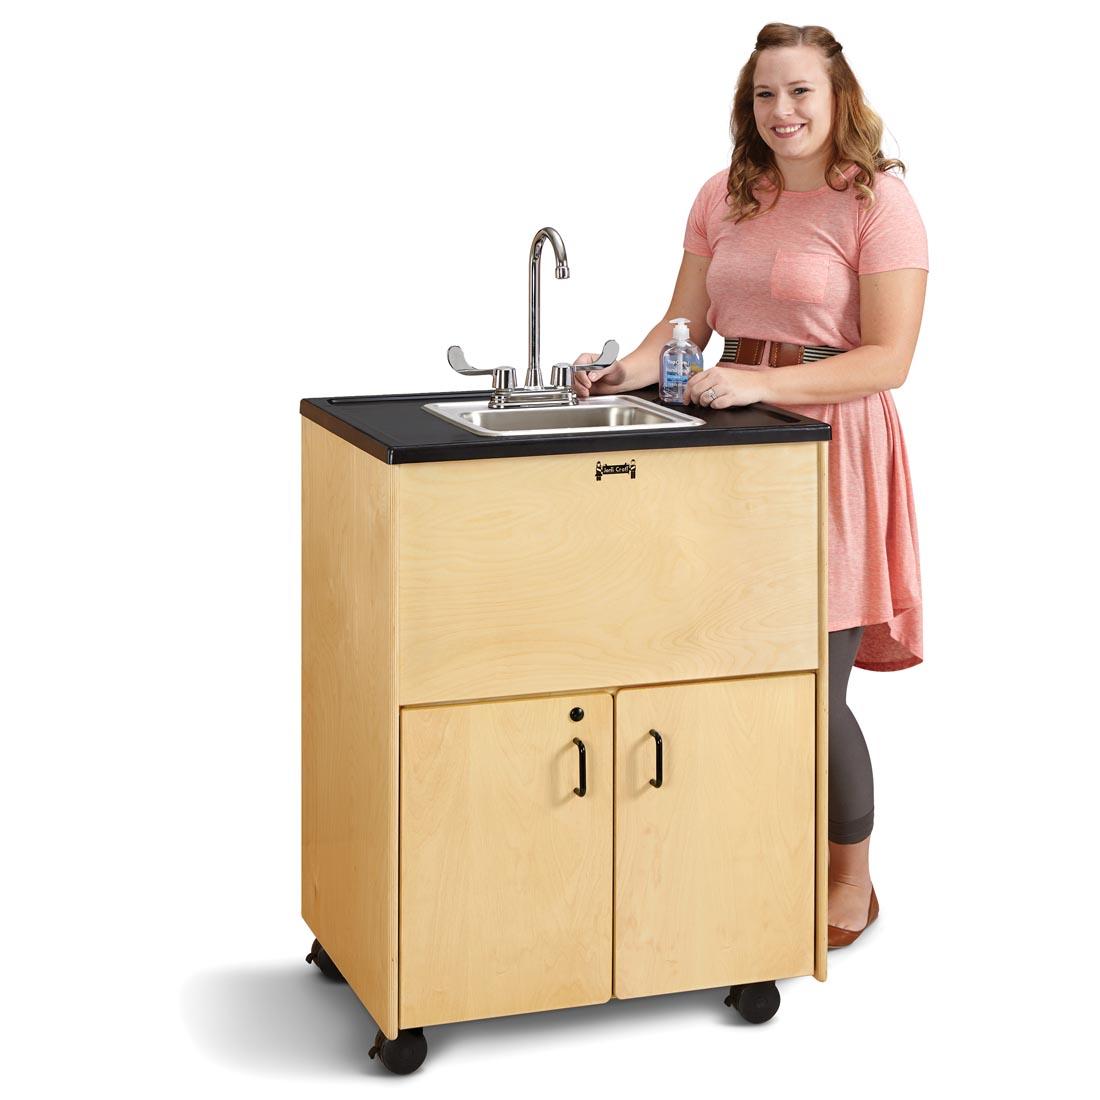 Adult standing at the Clean Hands Helper Portable Stainless Steel Sink